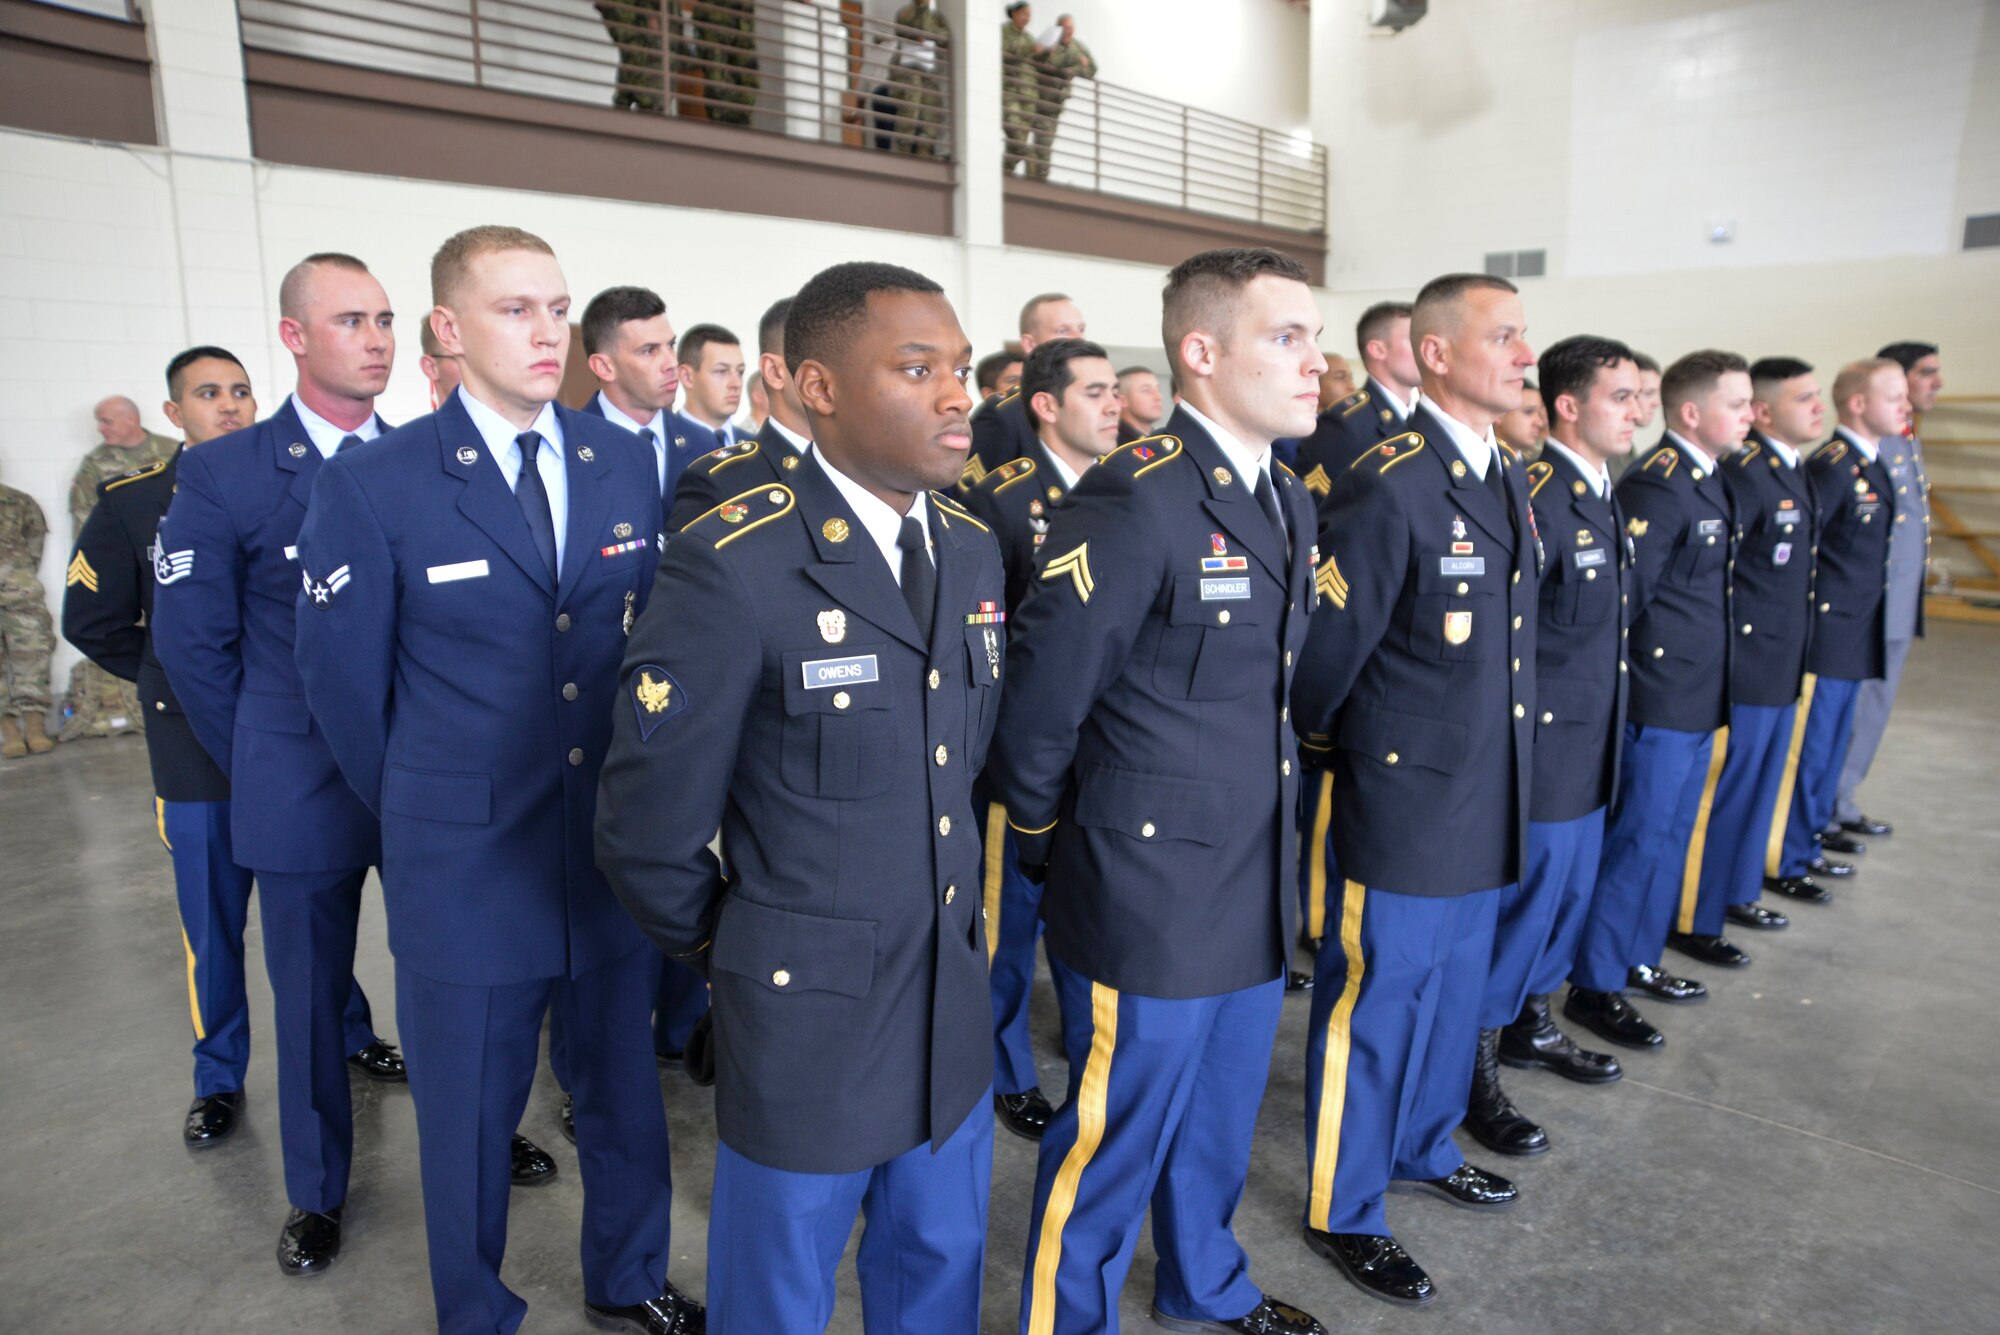 Competitors of the Texas National Guard’s 2019 Best Warrior Competition stand in formation before their first event of the competition at Camp Swift, Texas Feb. 27, 2019.  The four-day event will put the competitors through demanding physical and mental tests which include a physical fitness test, an obstacle course, marksmanship drills, formal board interviews and written exams. (Texas Air National Guard photo by Senior Airman Bryan Swink)